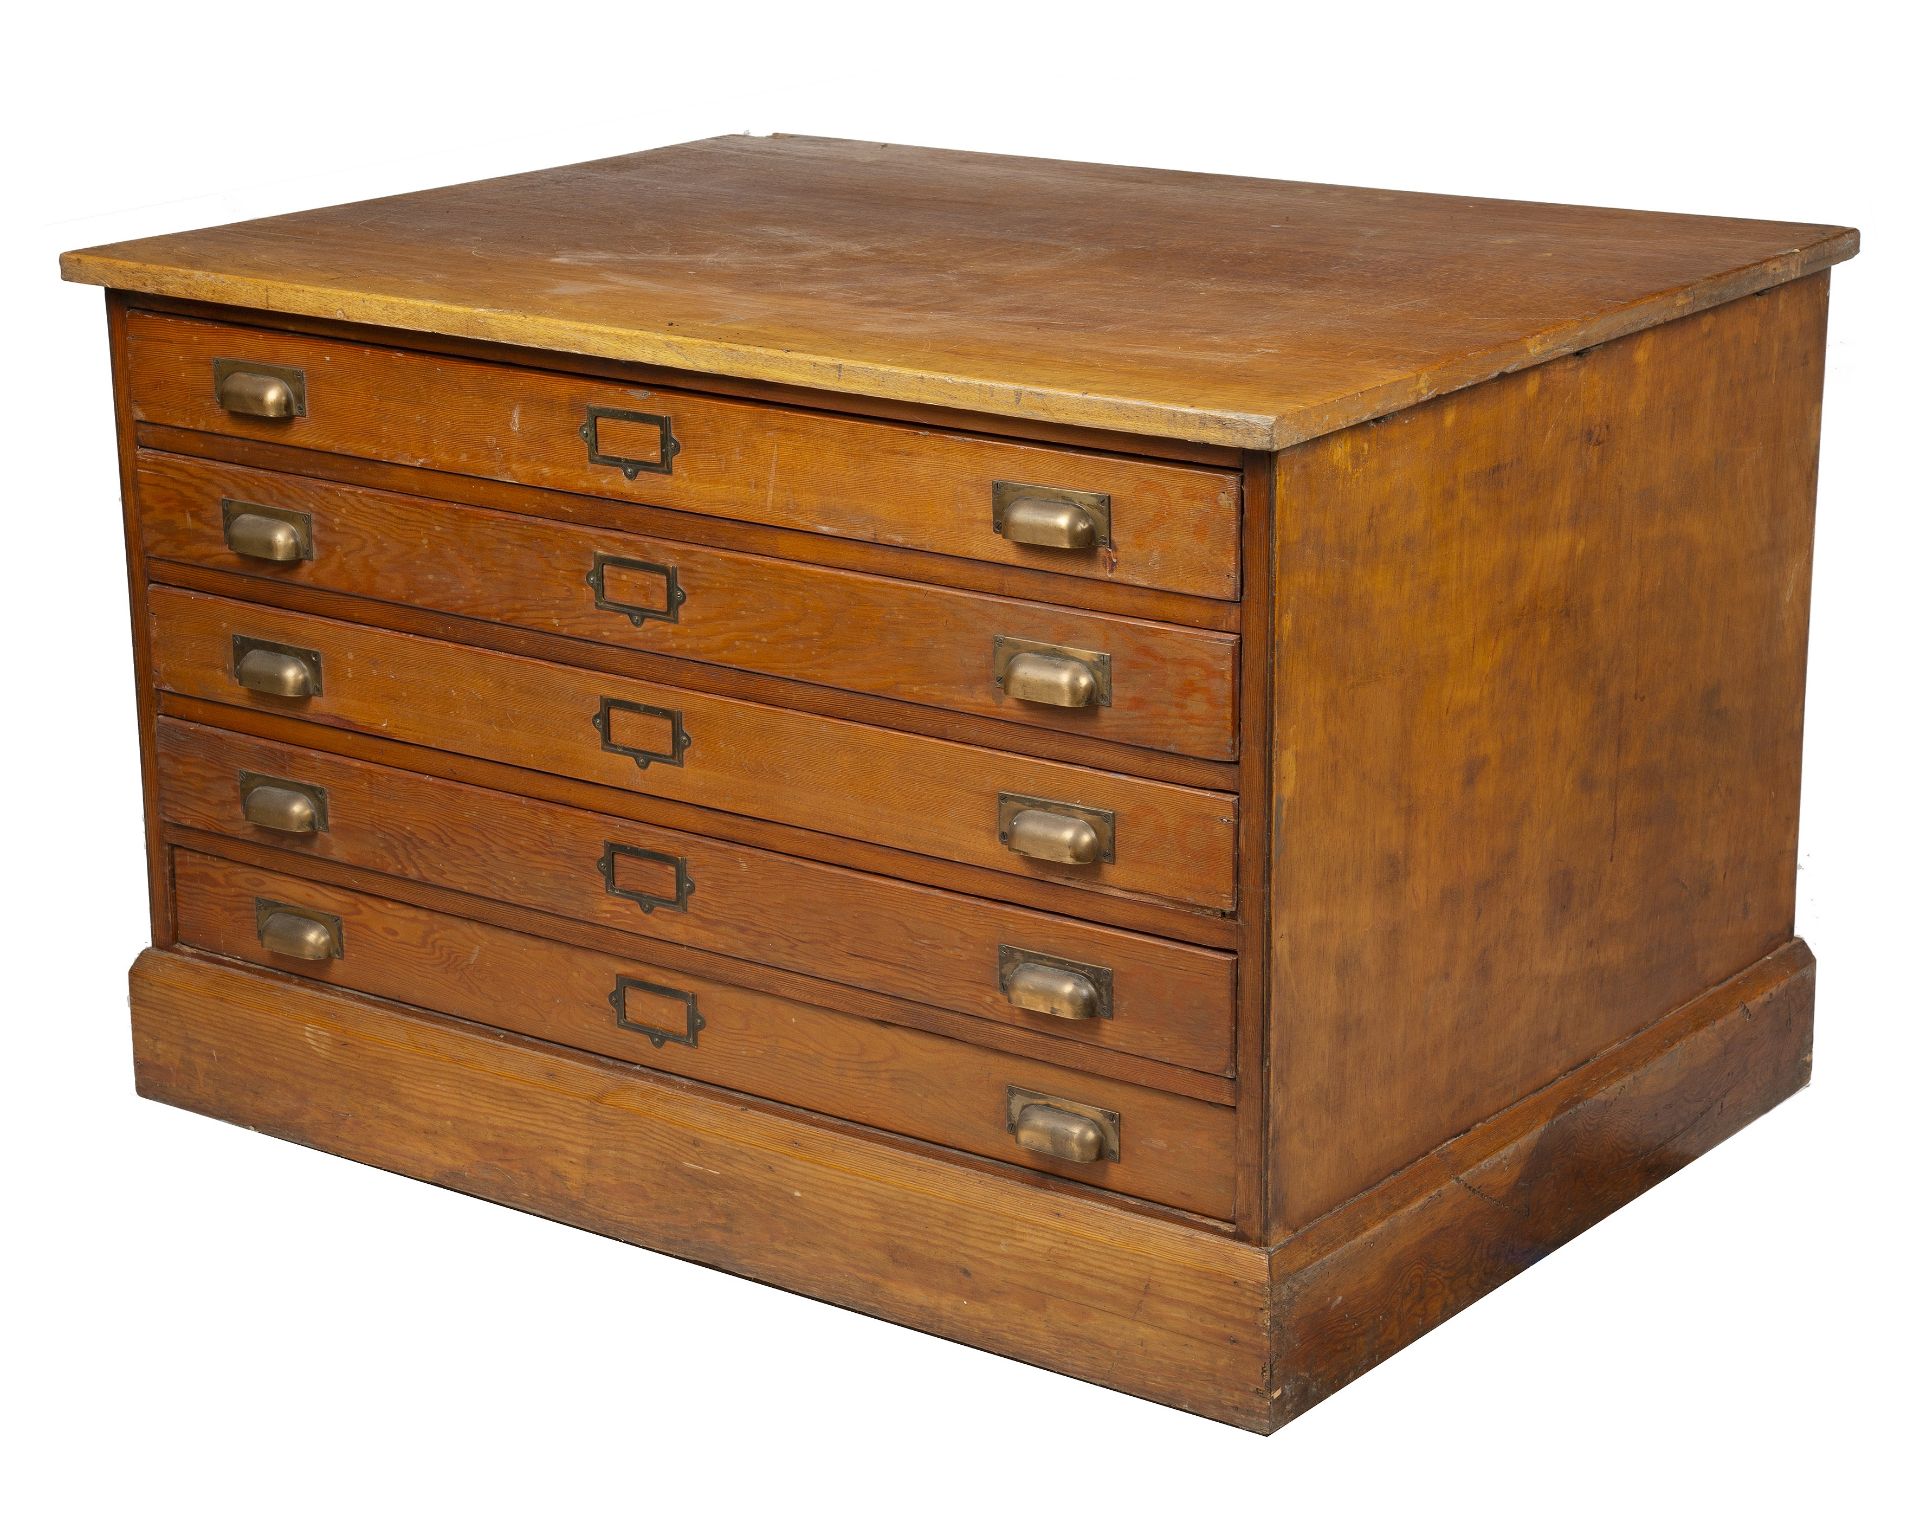 An early 20th century oak and pine five drawer plan chest, with cup handles and a plinth base, 120cm - Image 3 of 5